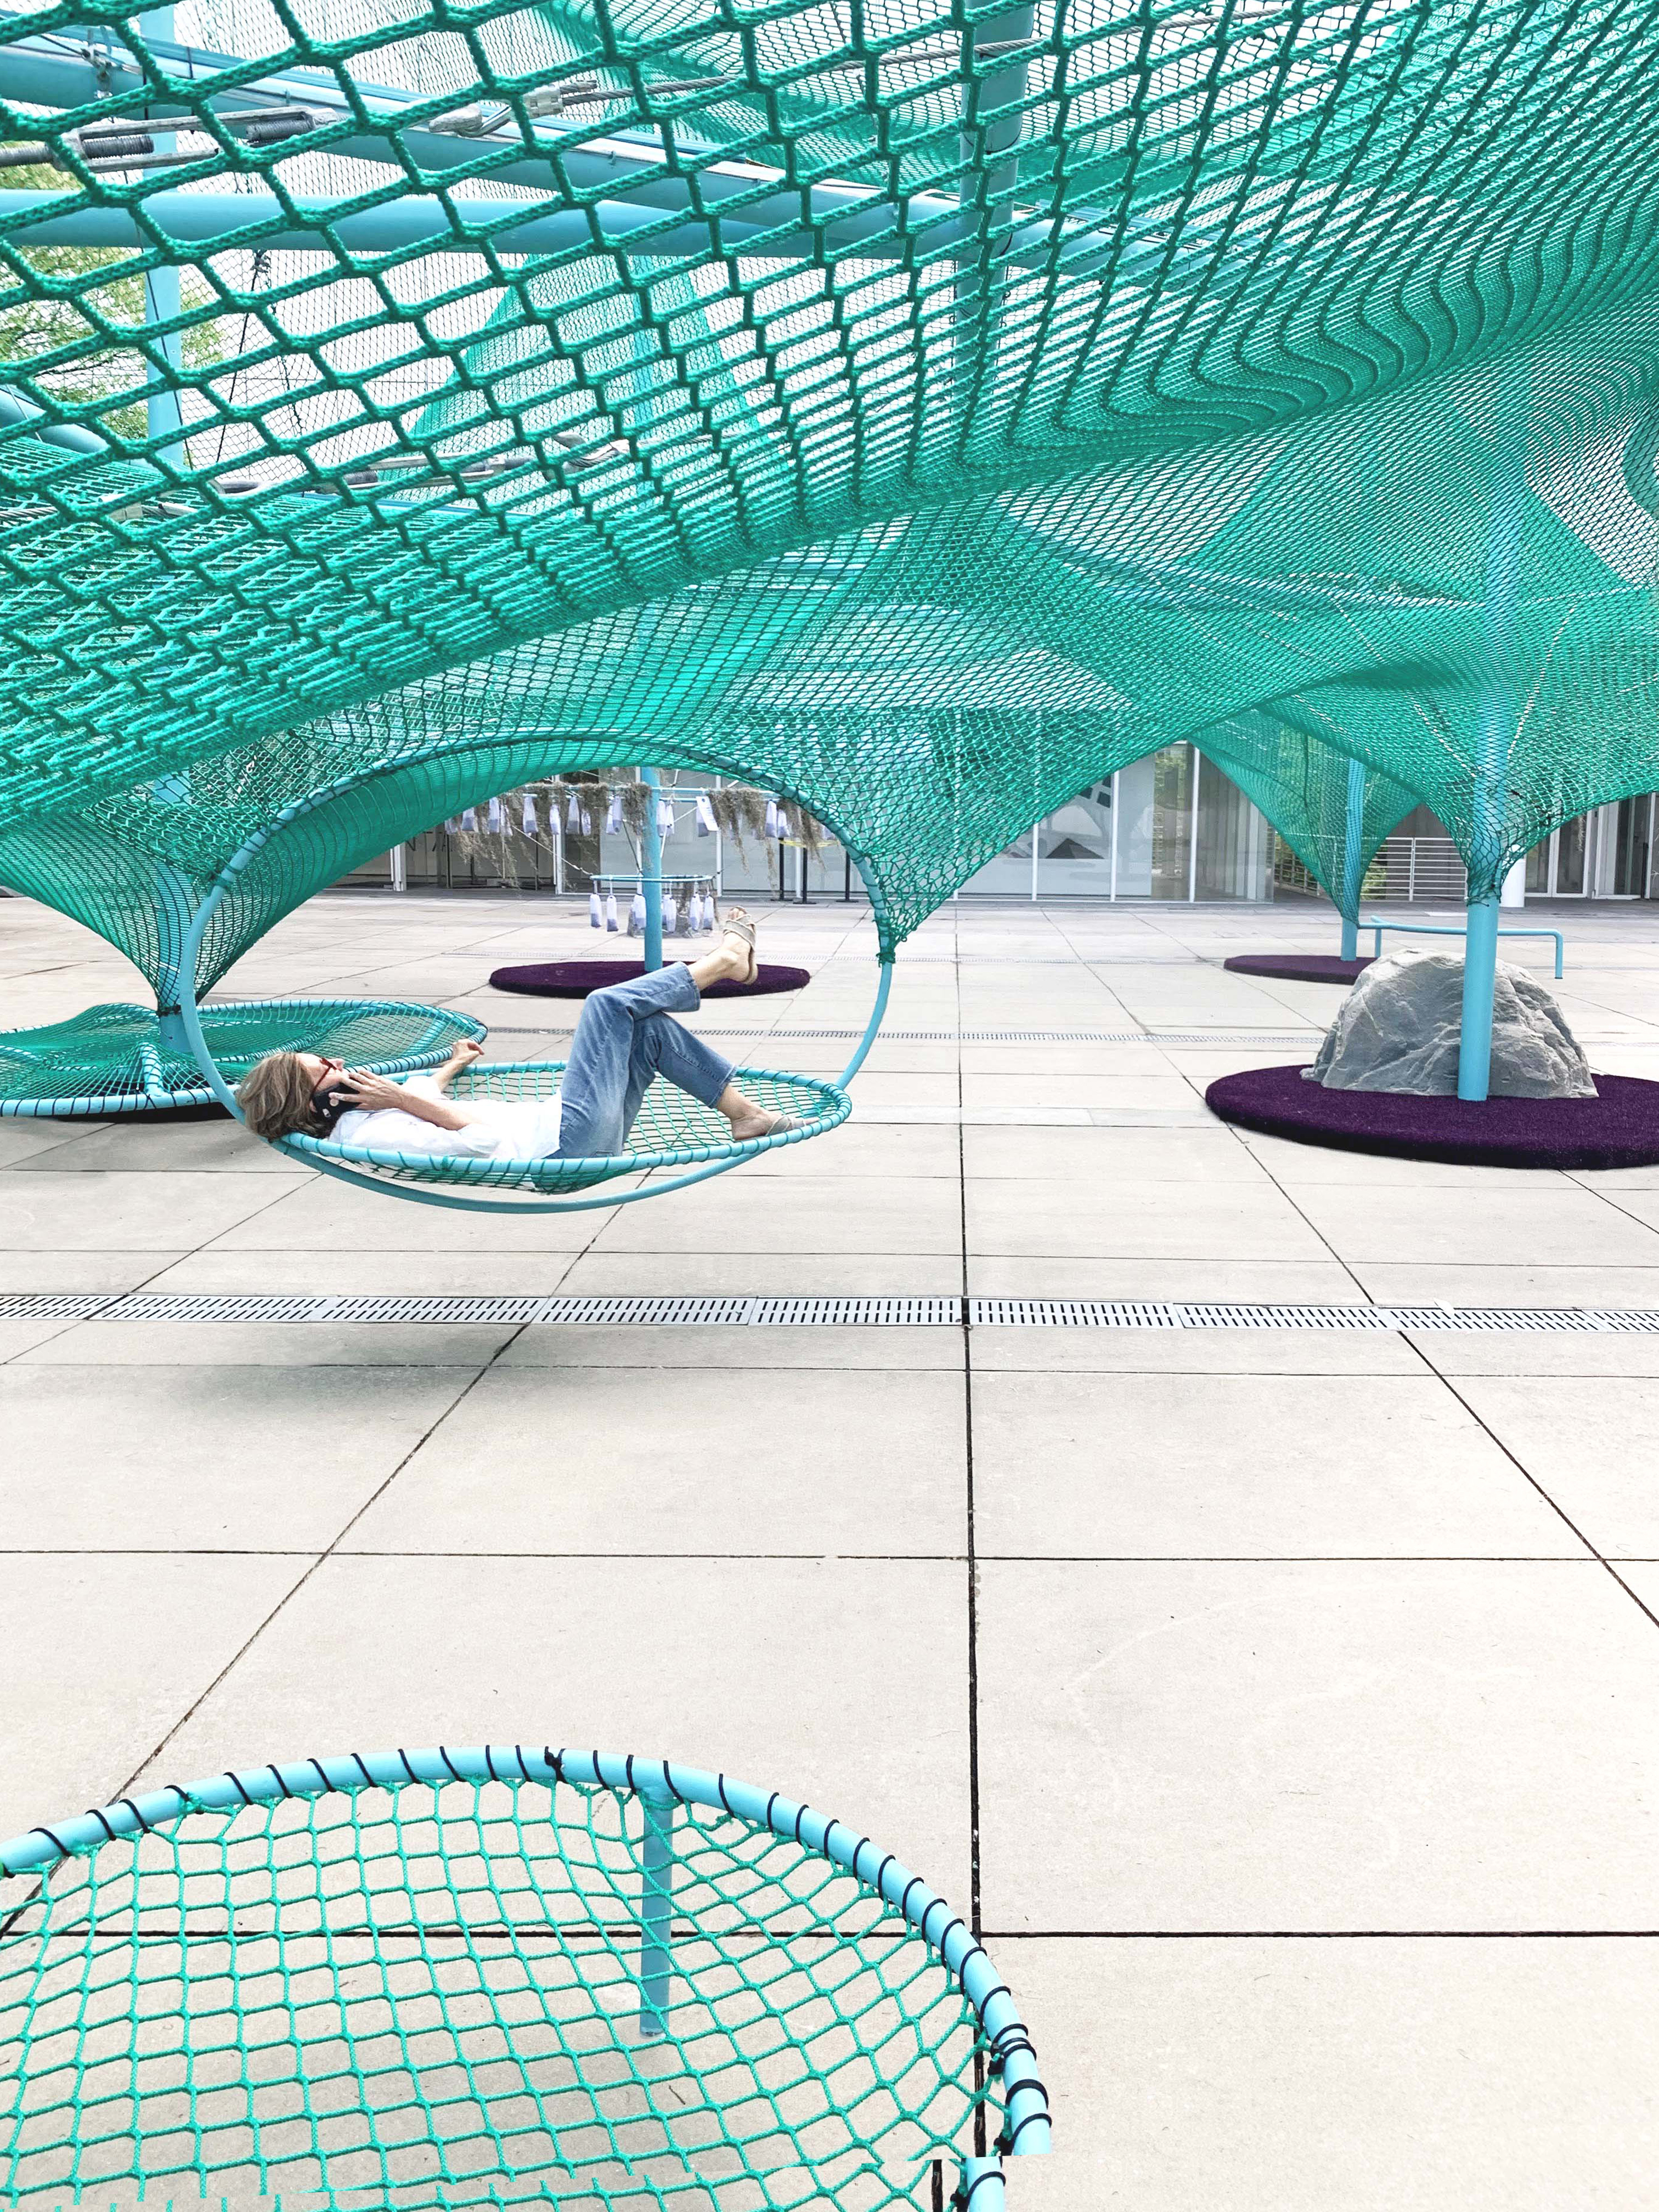 A place to relax from a hanging net structure